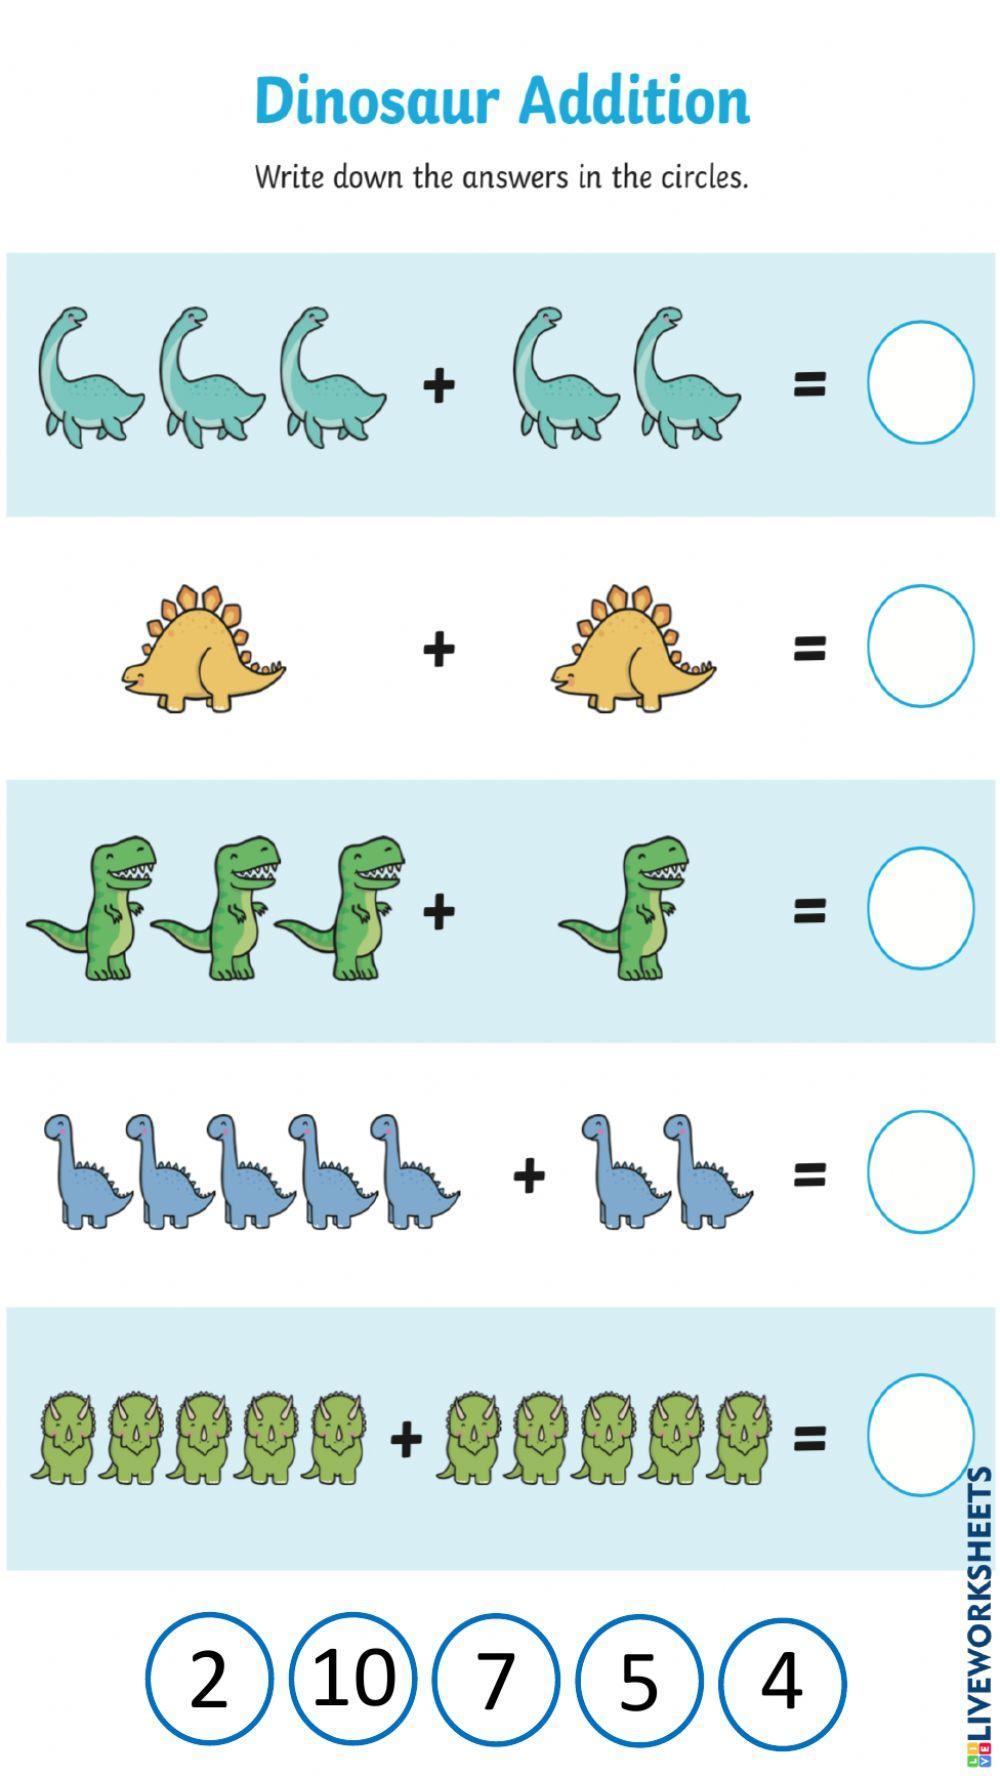 Addition and subtraction worksheet